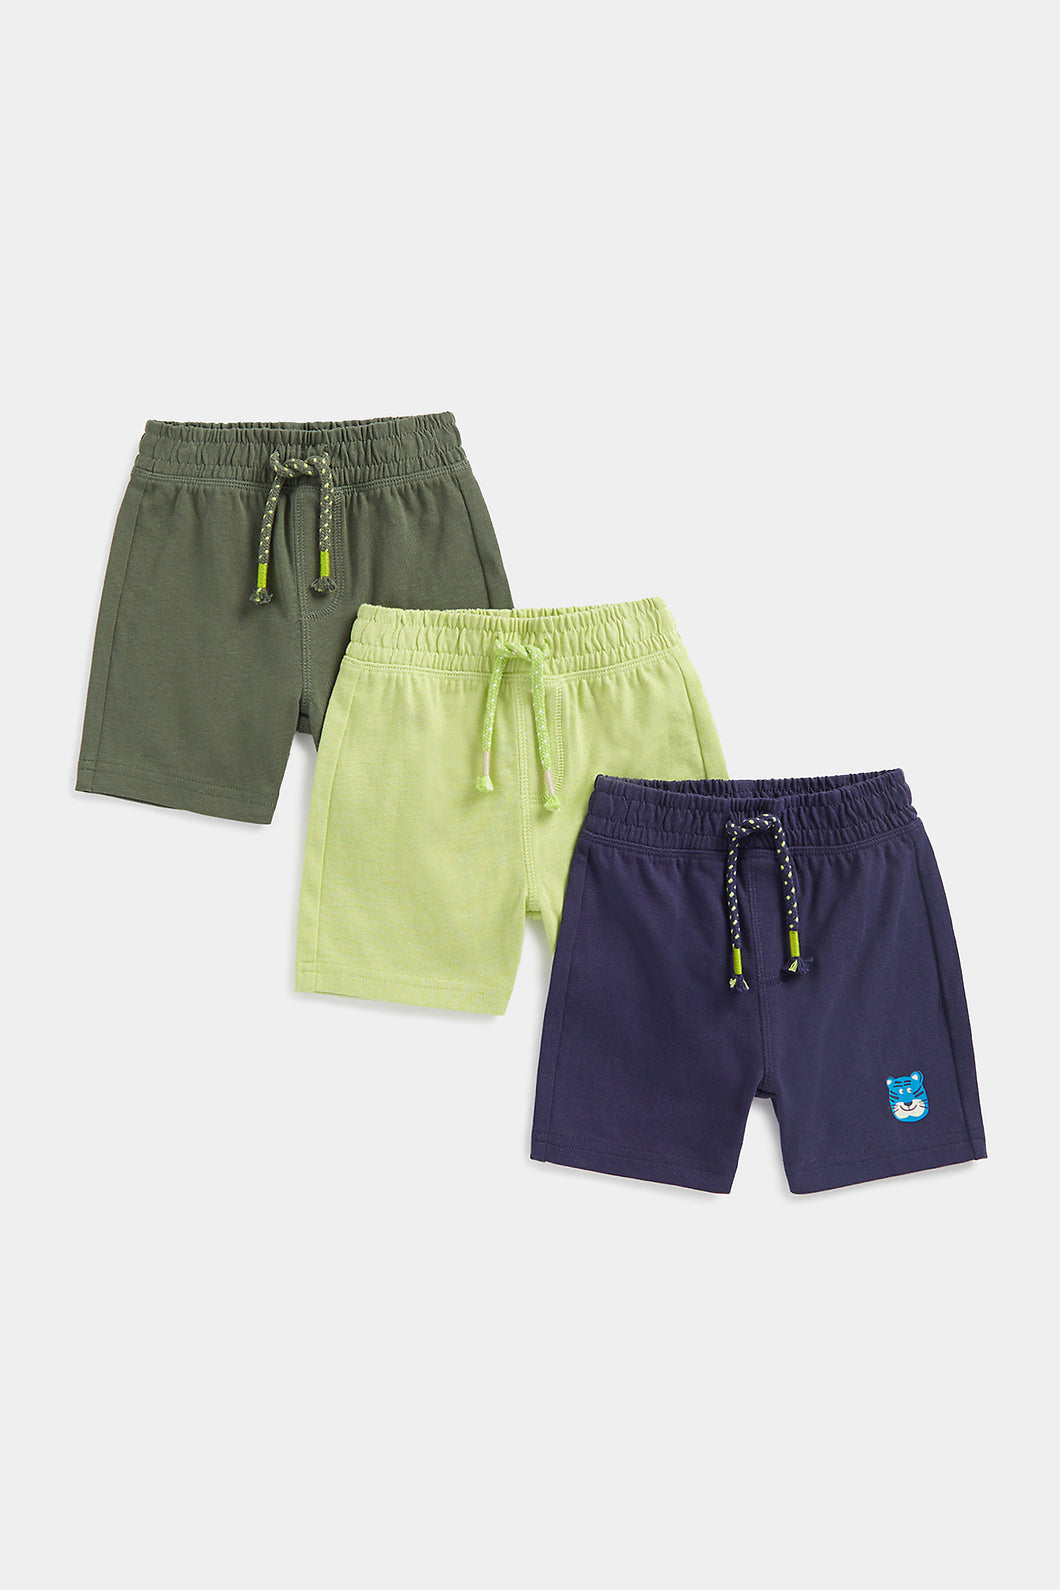 Mothercare Jungle Jersey Shorts - 3 Pack